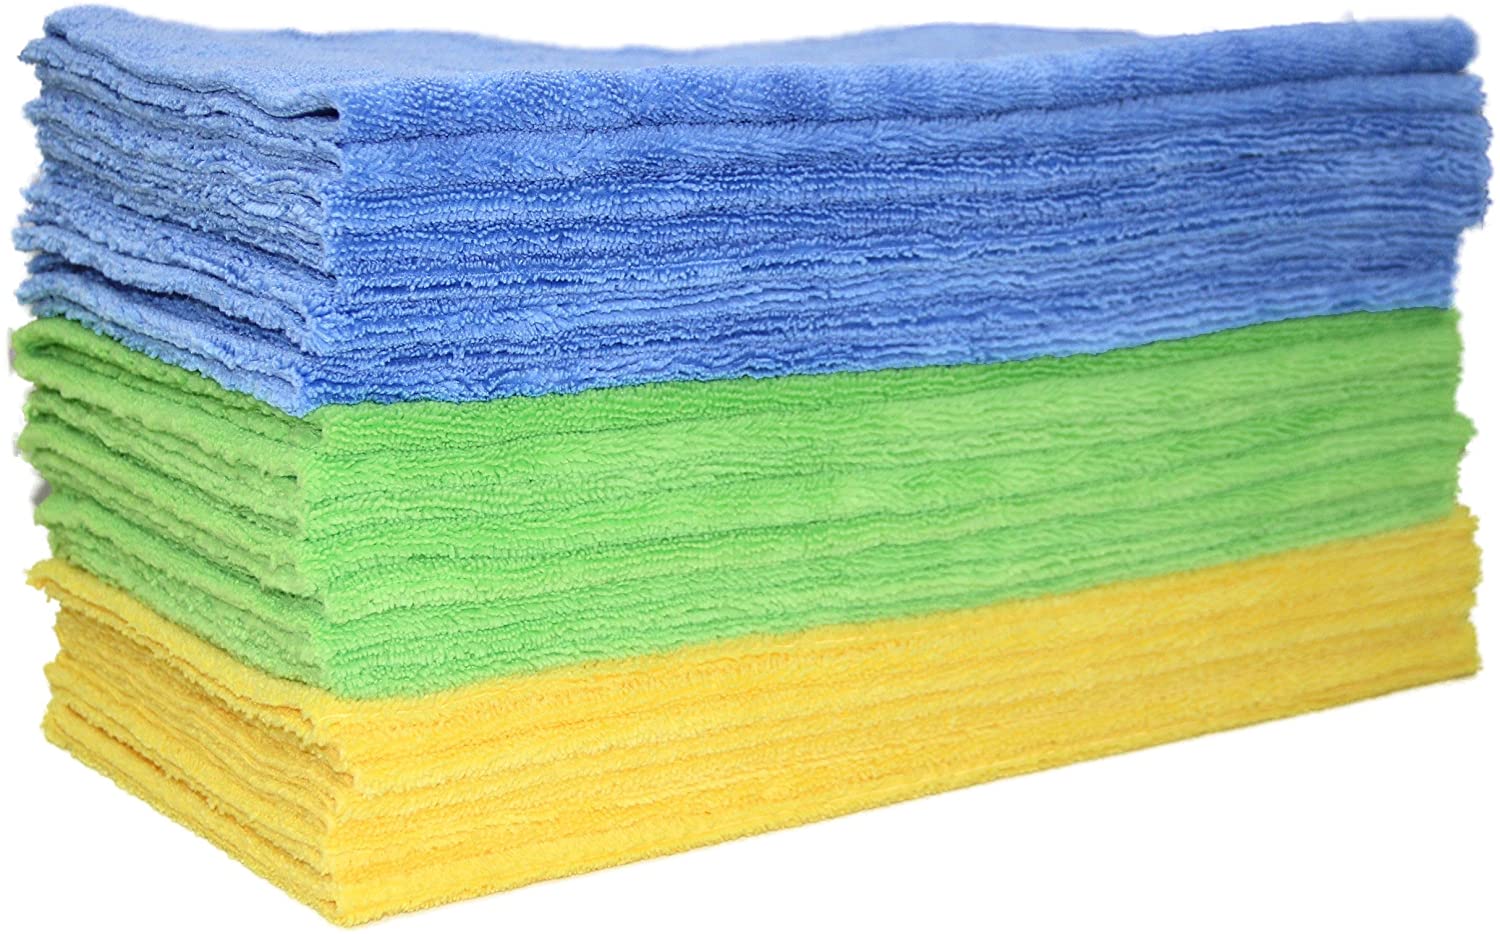 Polyte Microfiber Cleaning Towel